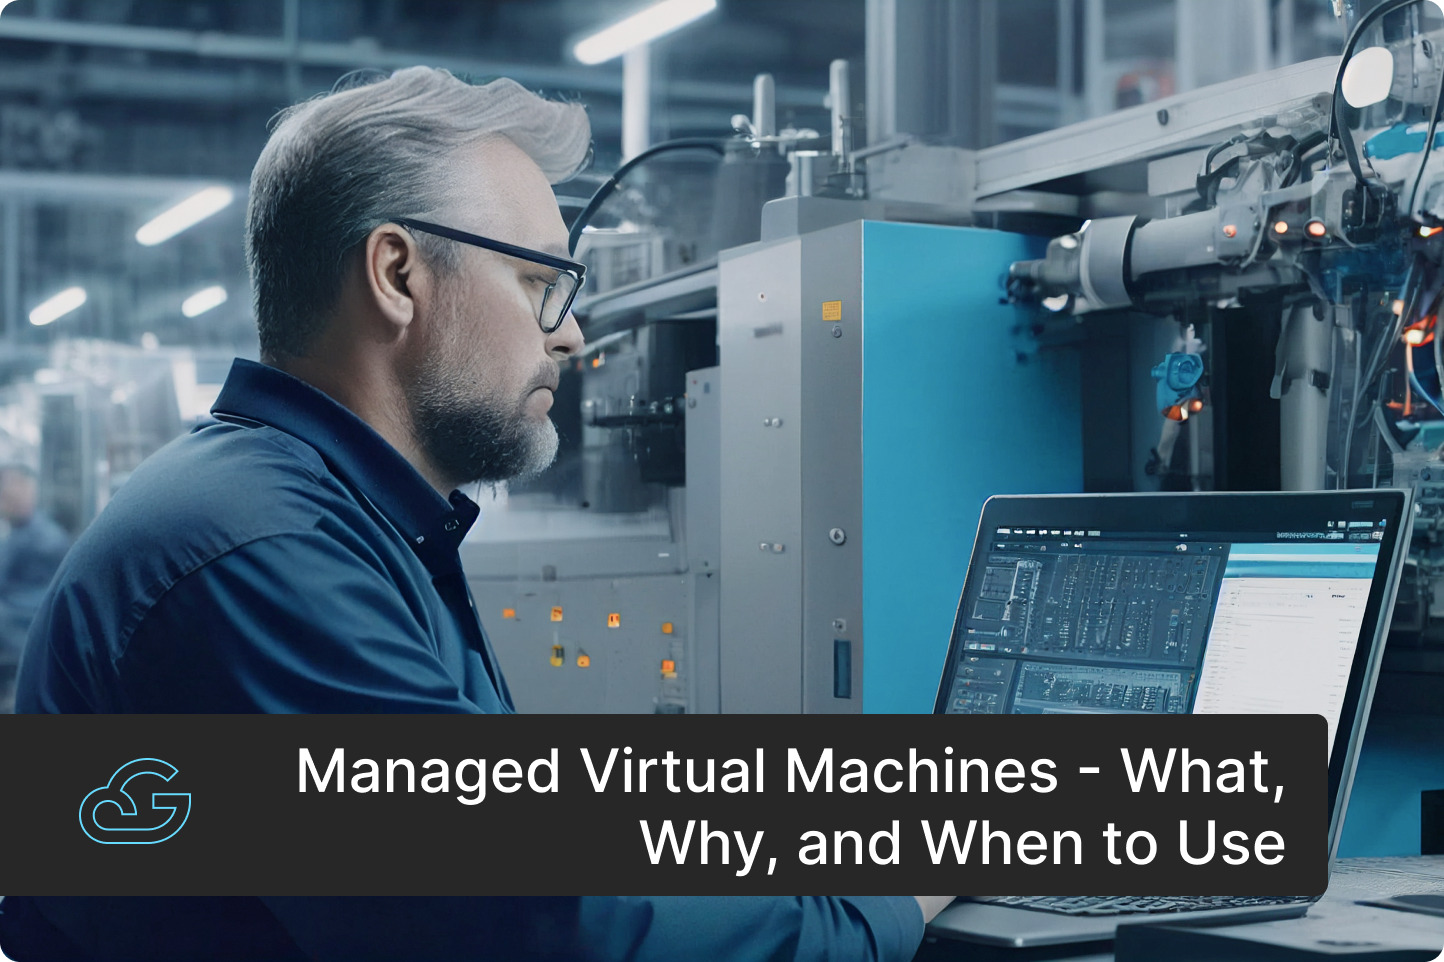 What is a Managed Virtual Machine